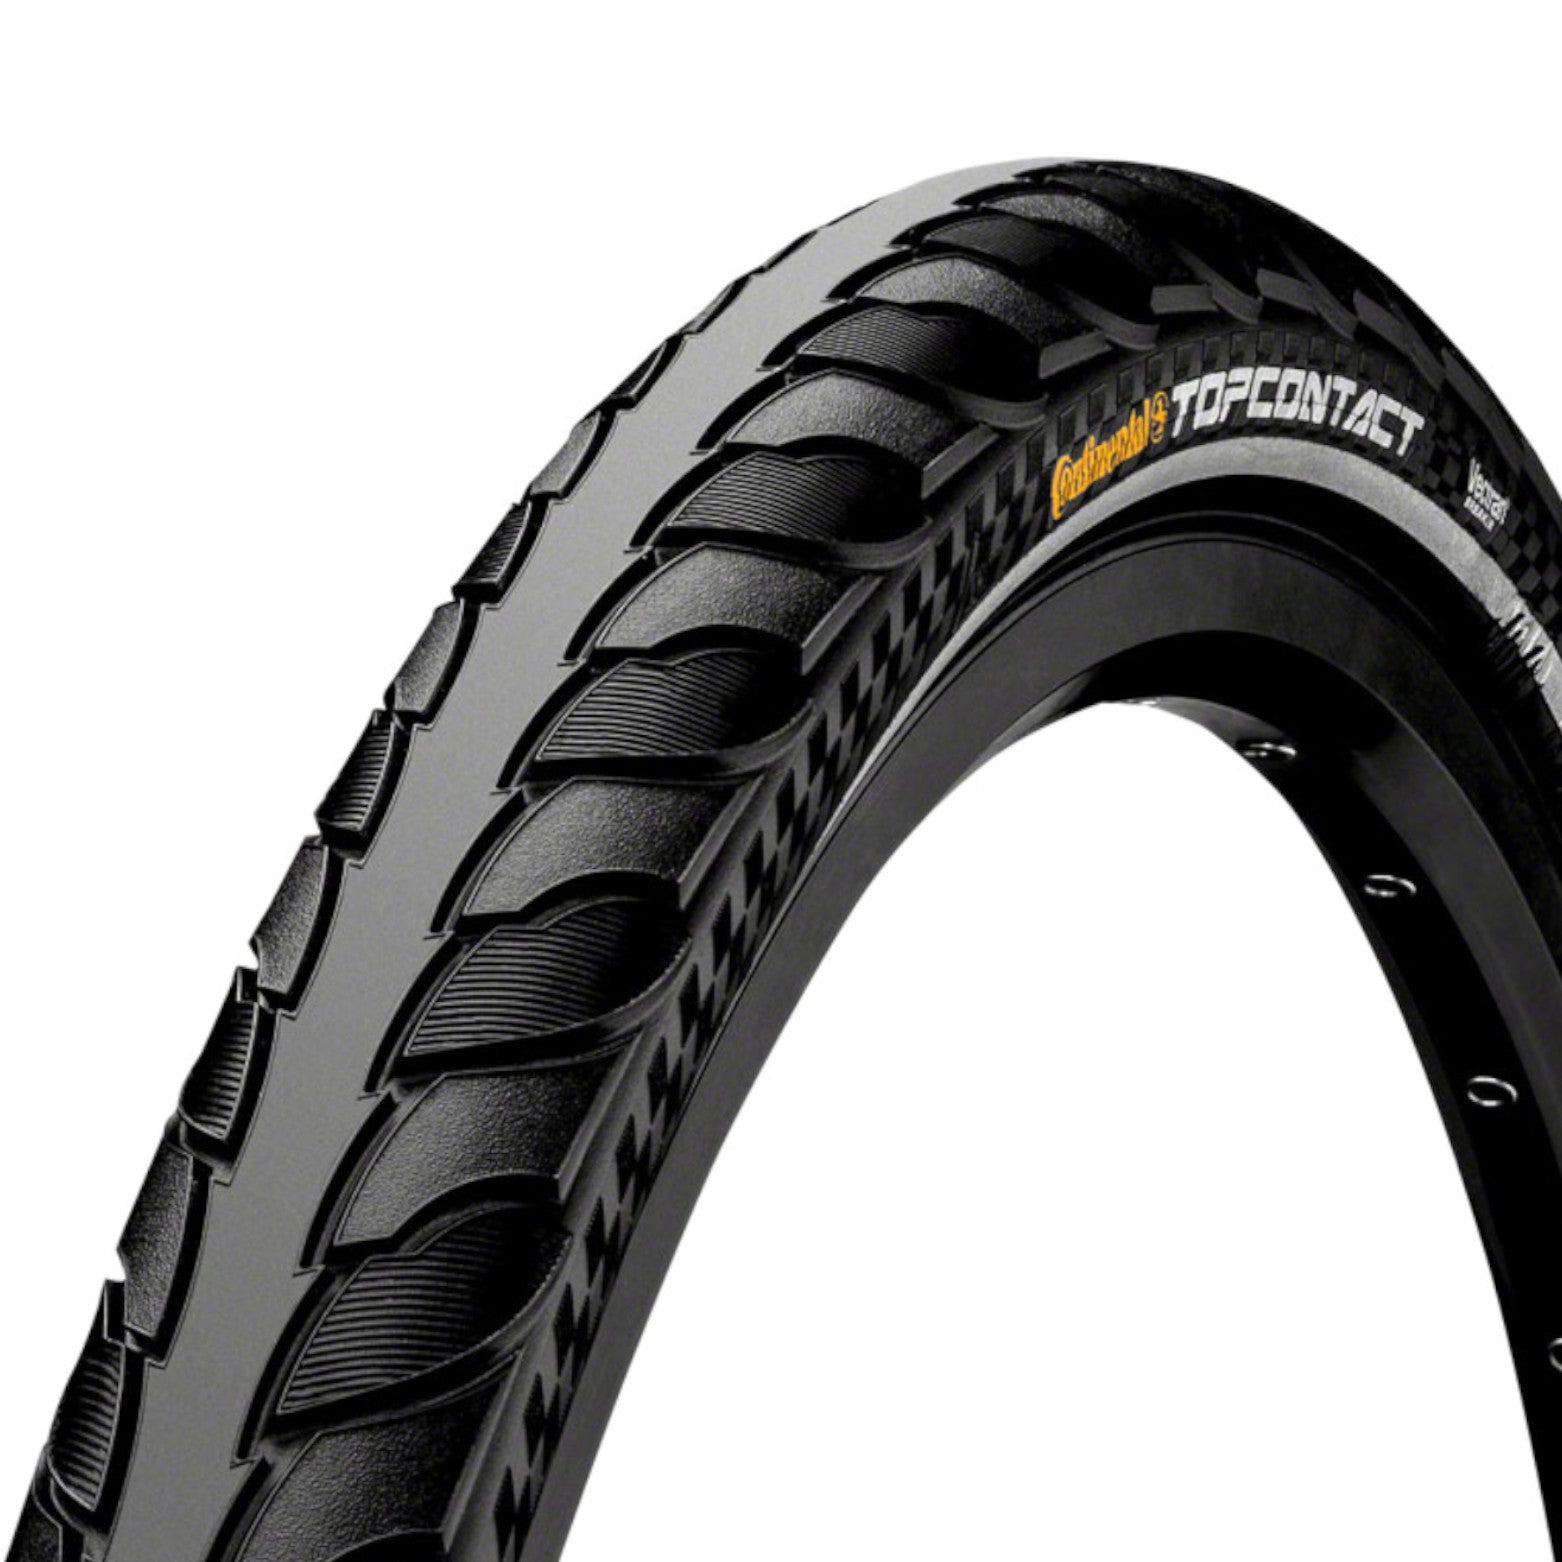 Continental Top Contact II 700 Folding Tire